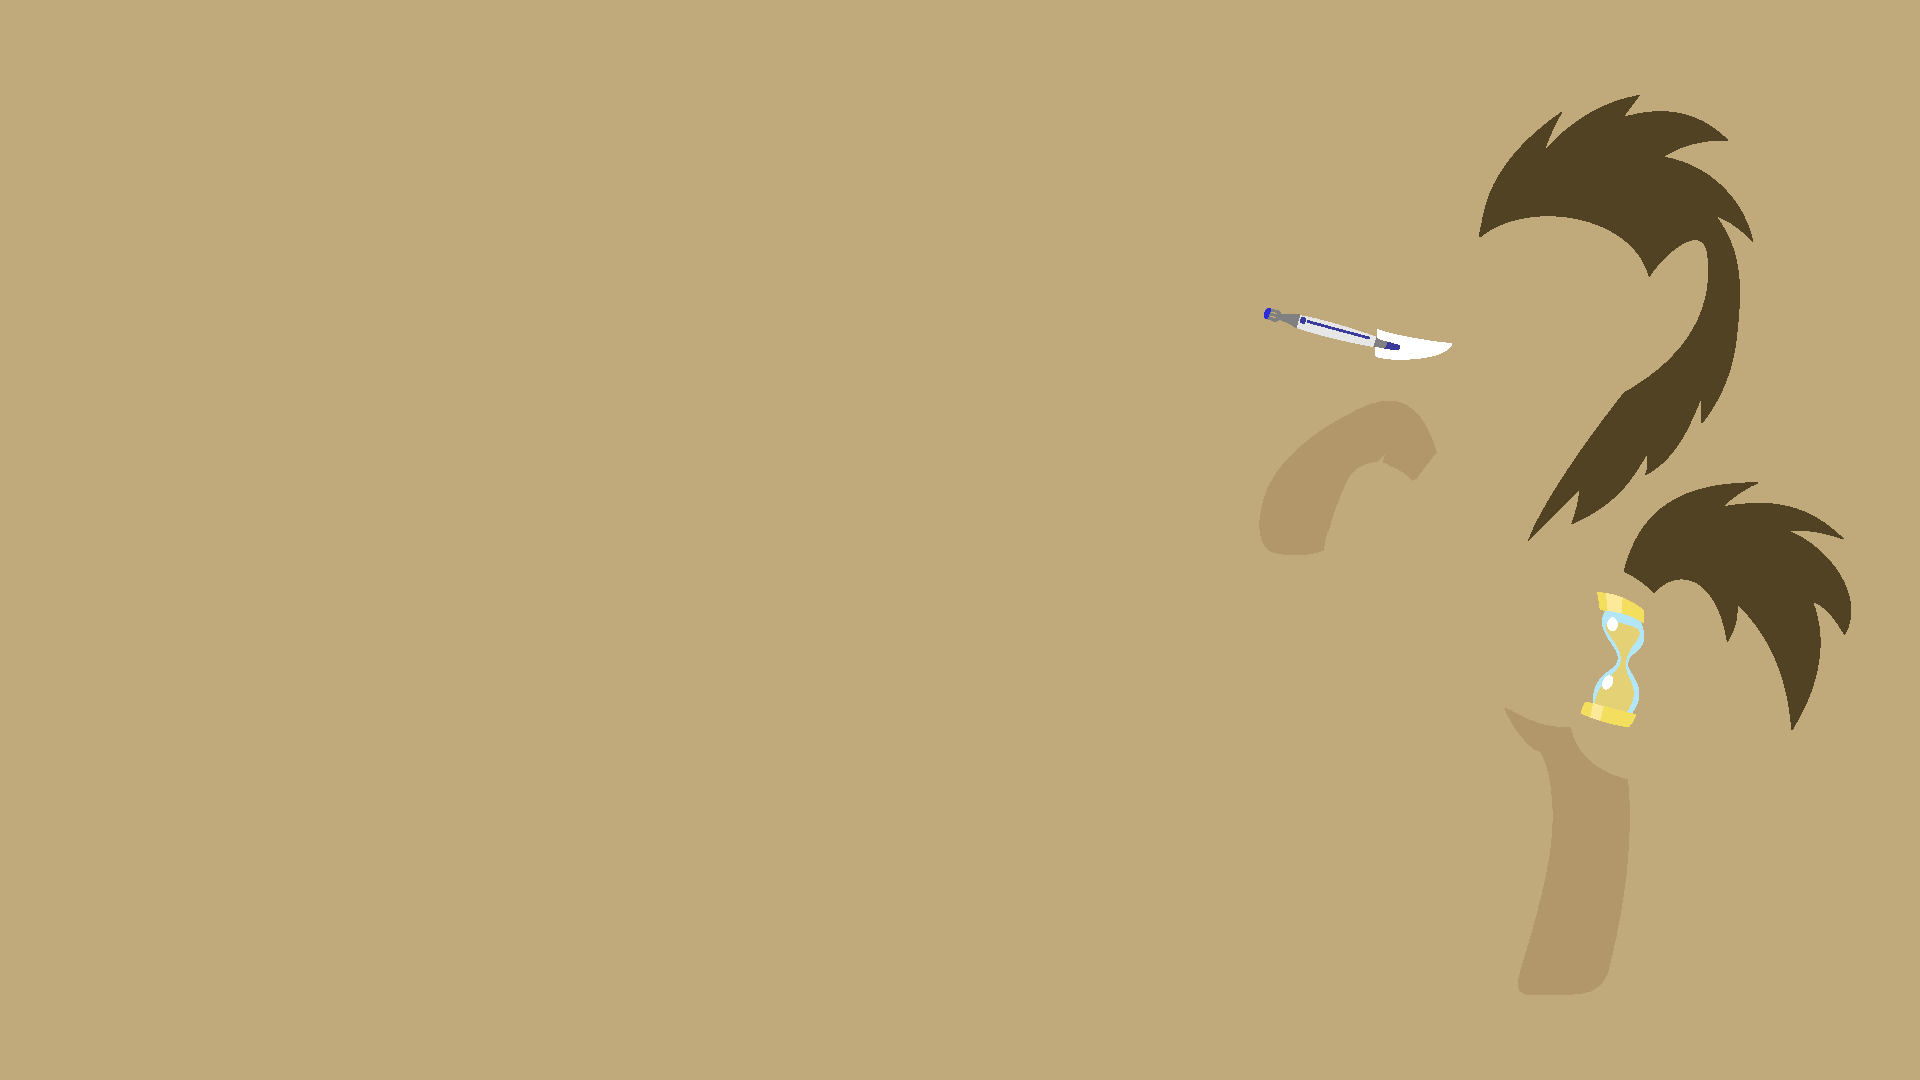 Doctor Whooves Minimalistic Wallpaper by hombre0, Kitana-Coldfire and OceanBreezeBrony